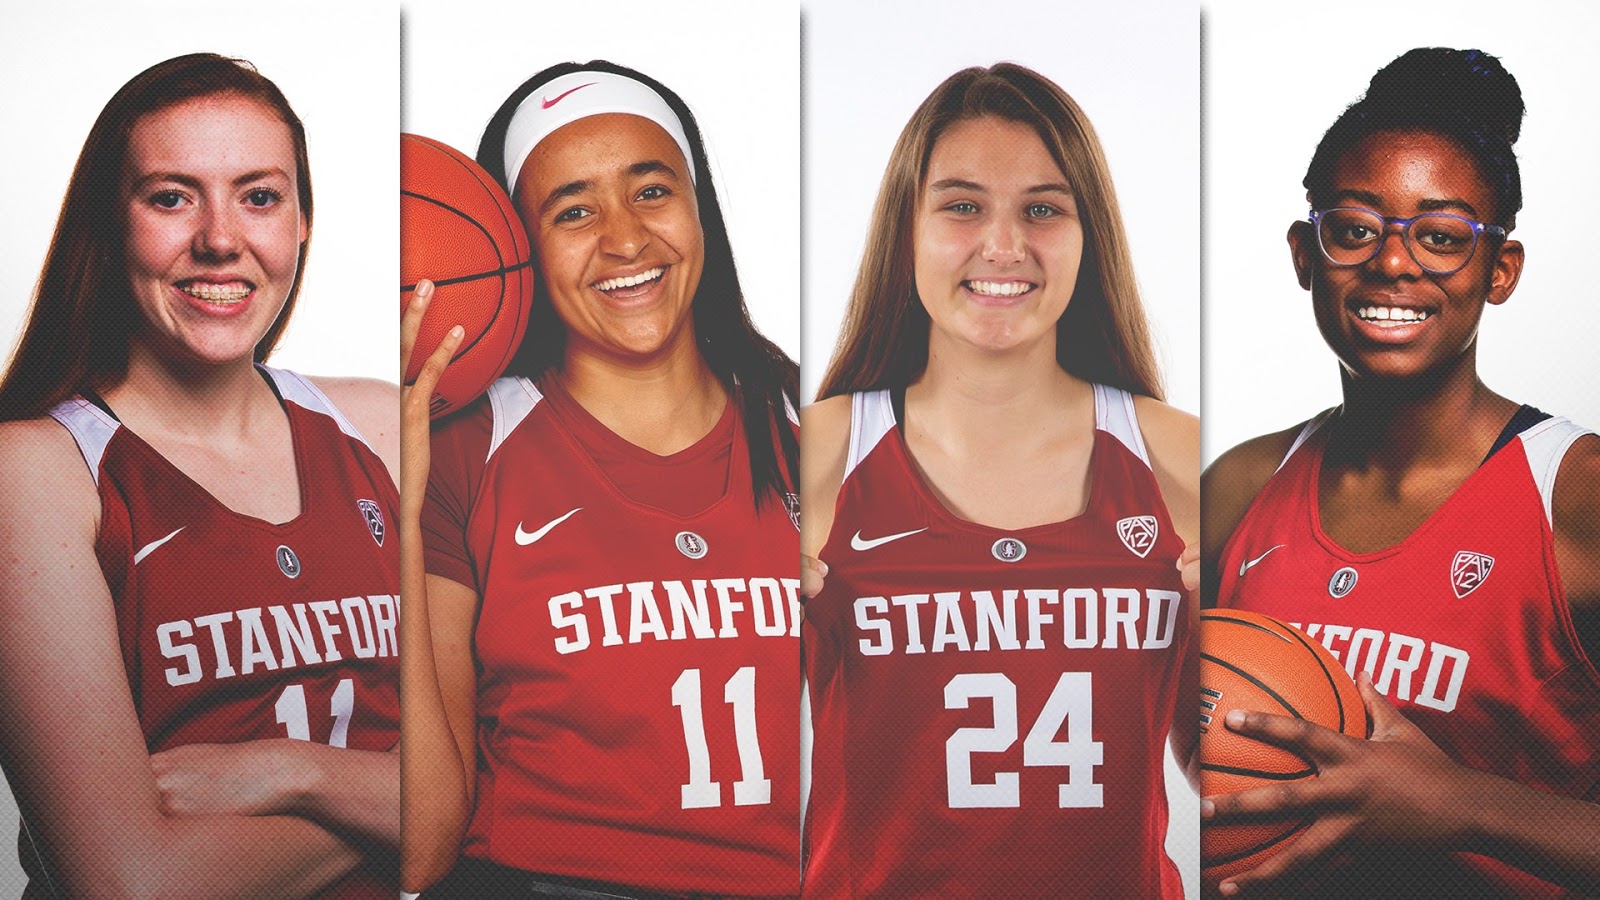 Stanford FBC Recruit News With four ALLUSA recruits, is this